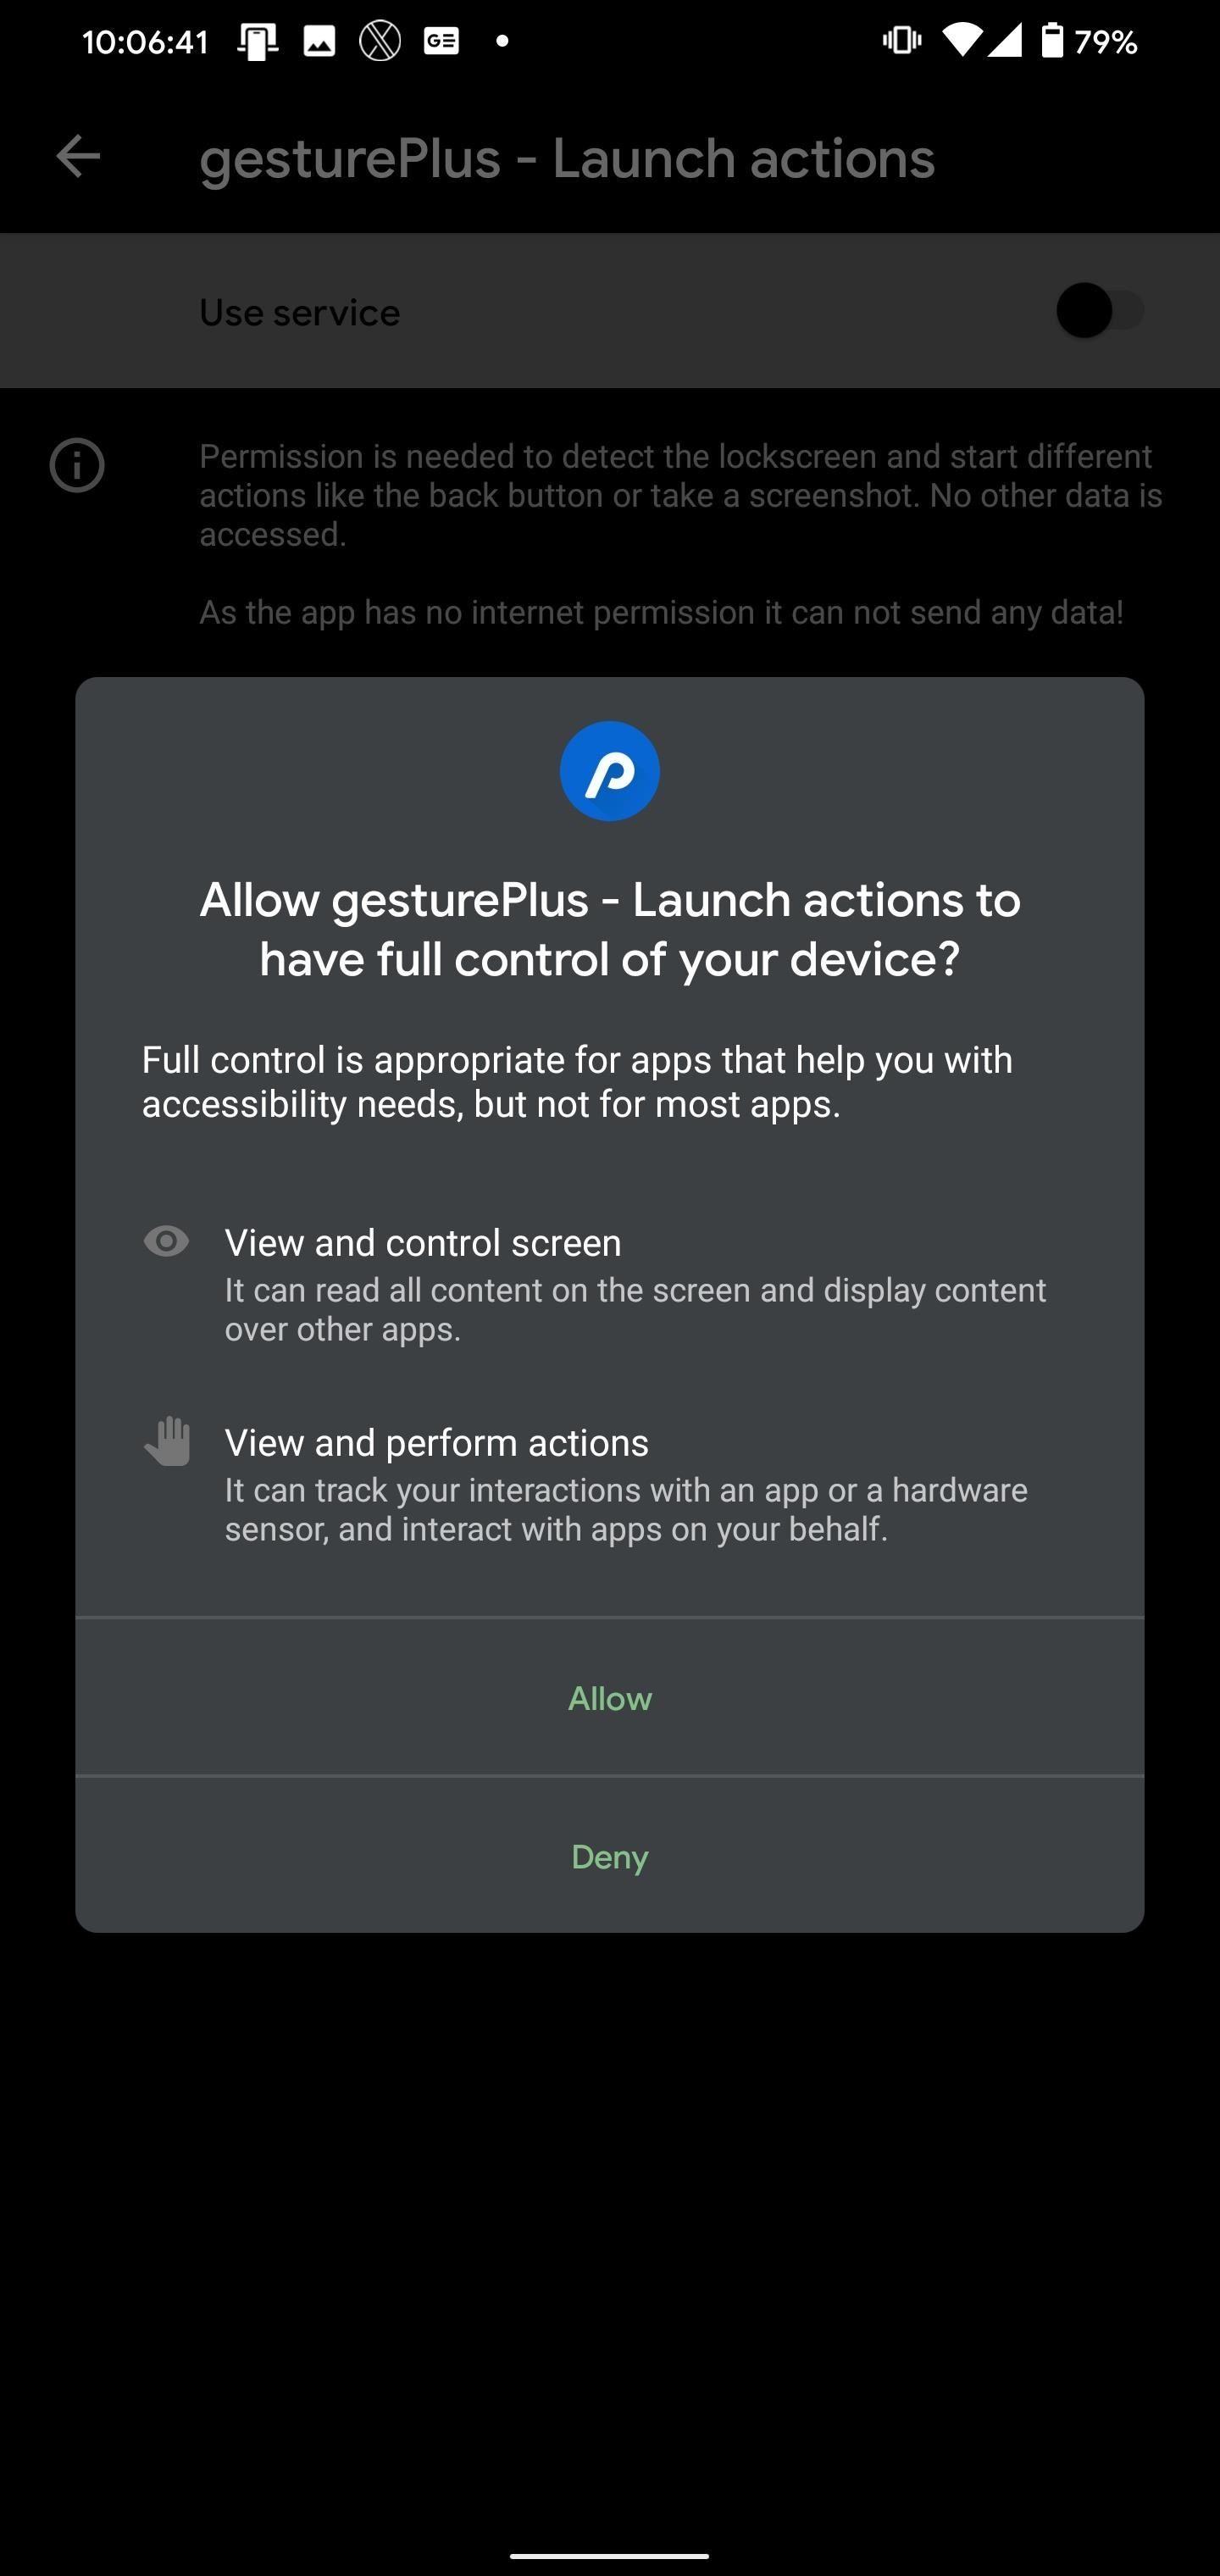 How to Bring Back the Back Button with Android 10's Gestures